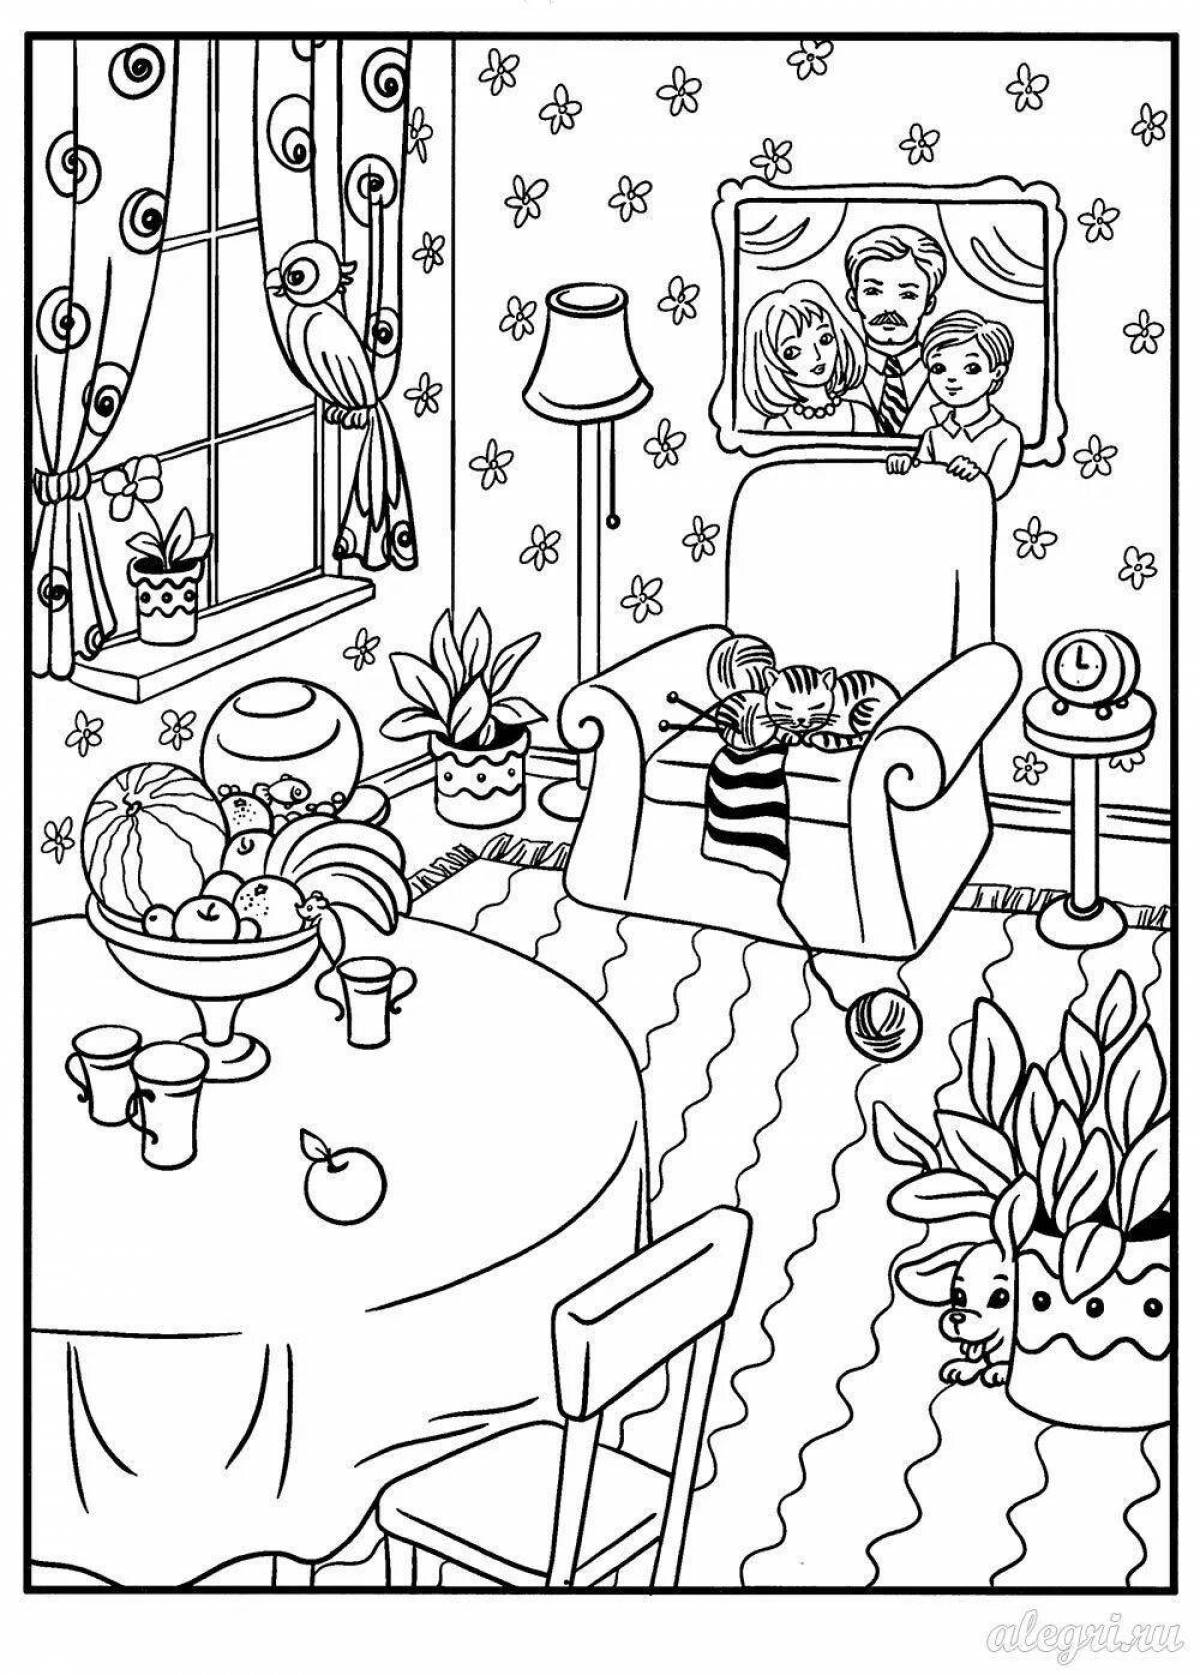 Vivacious attention coloring page